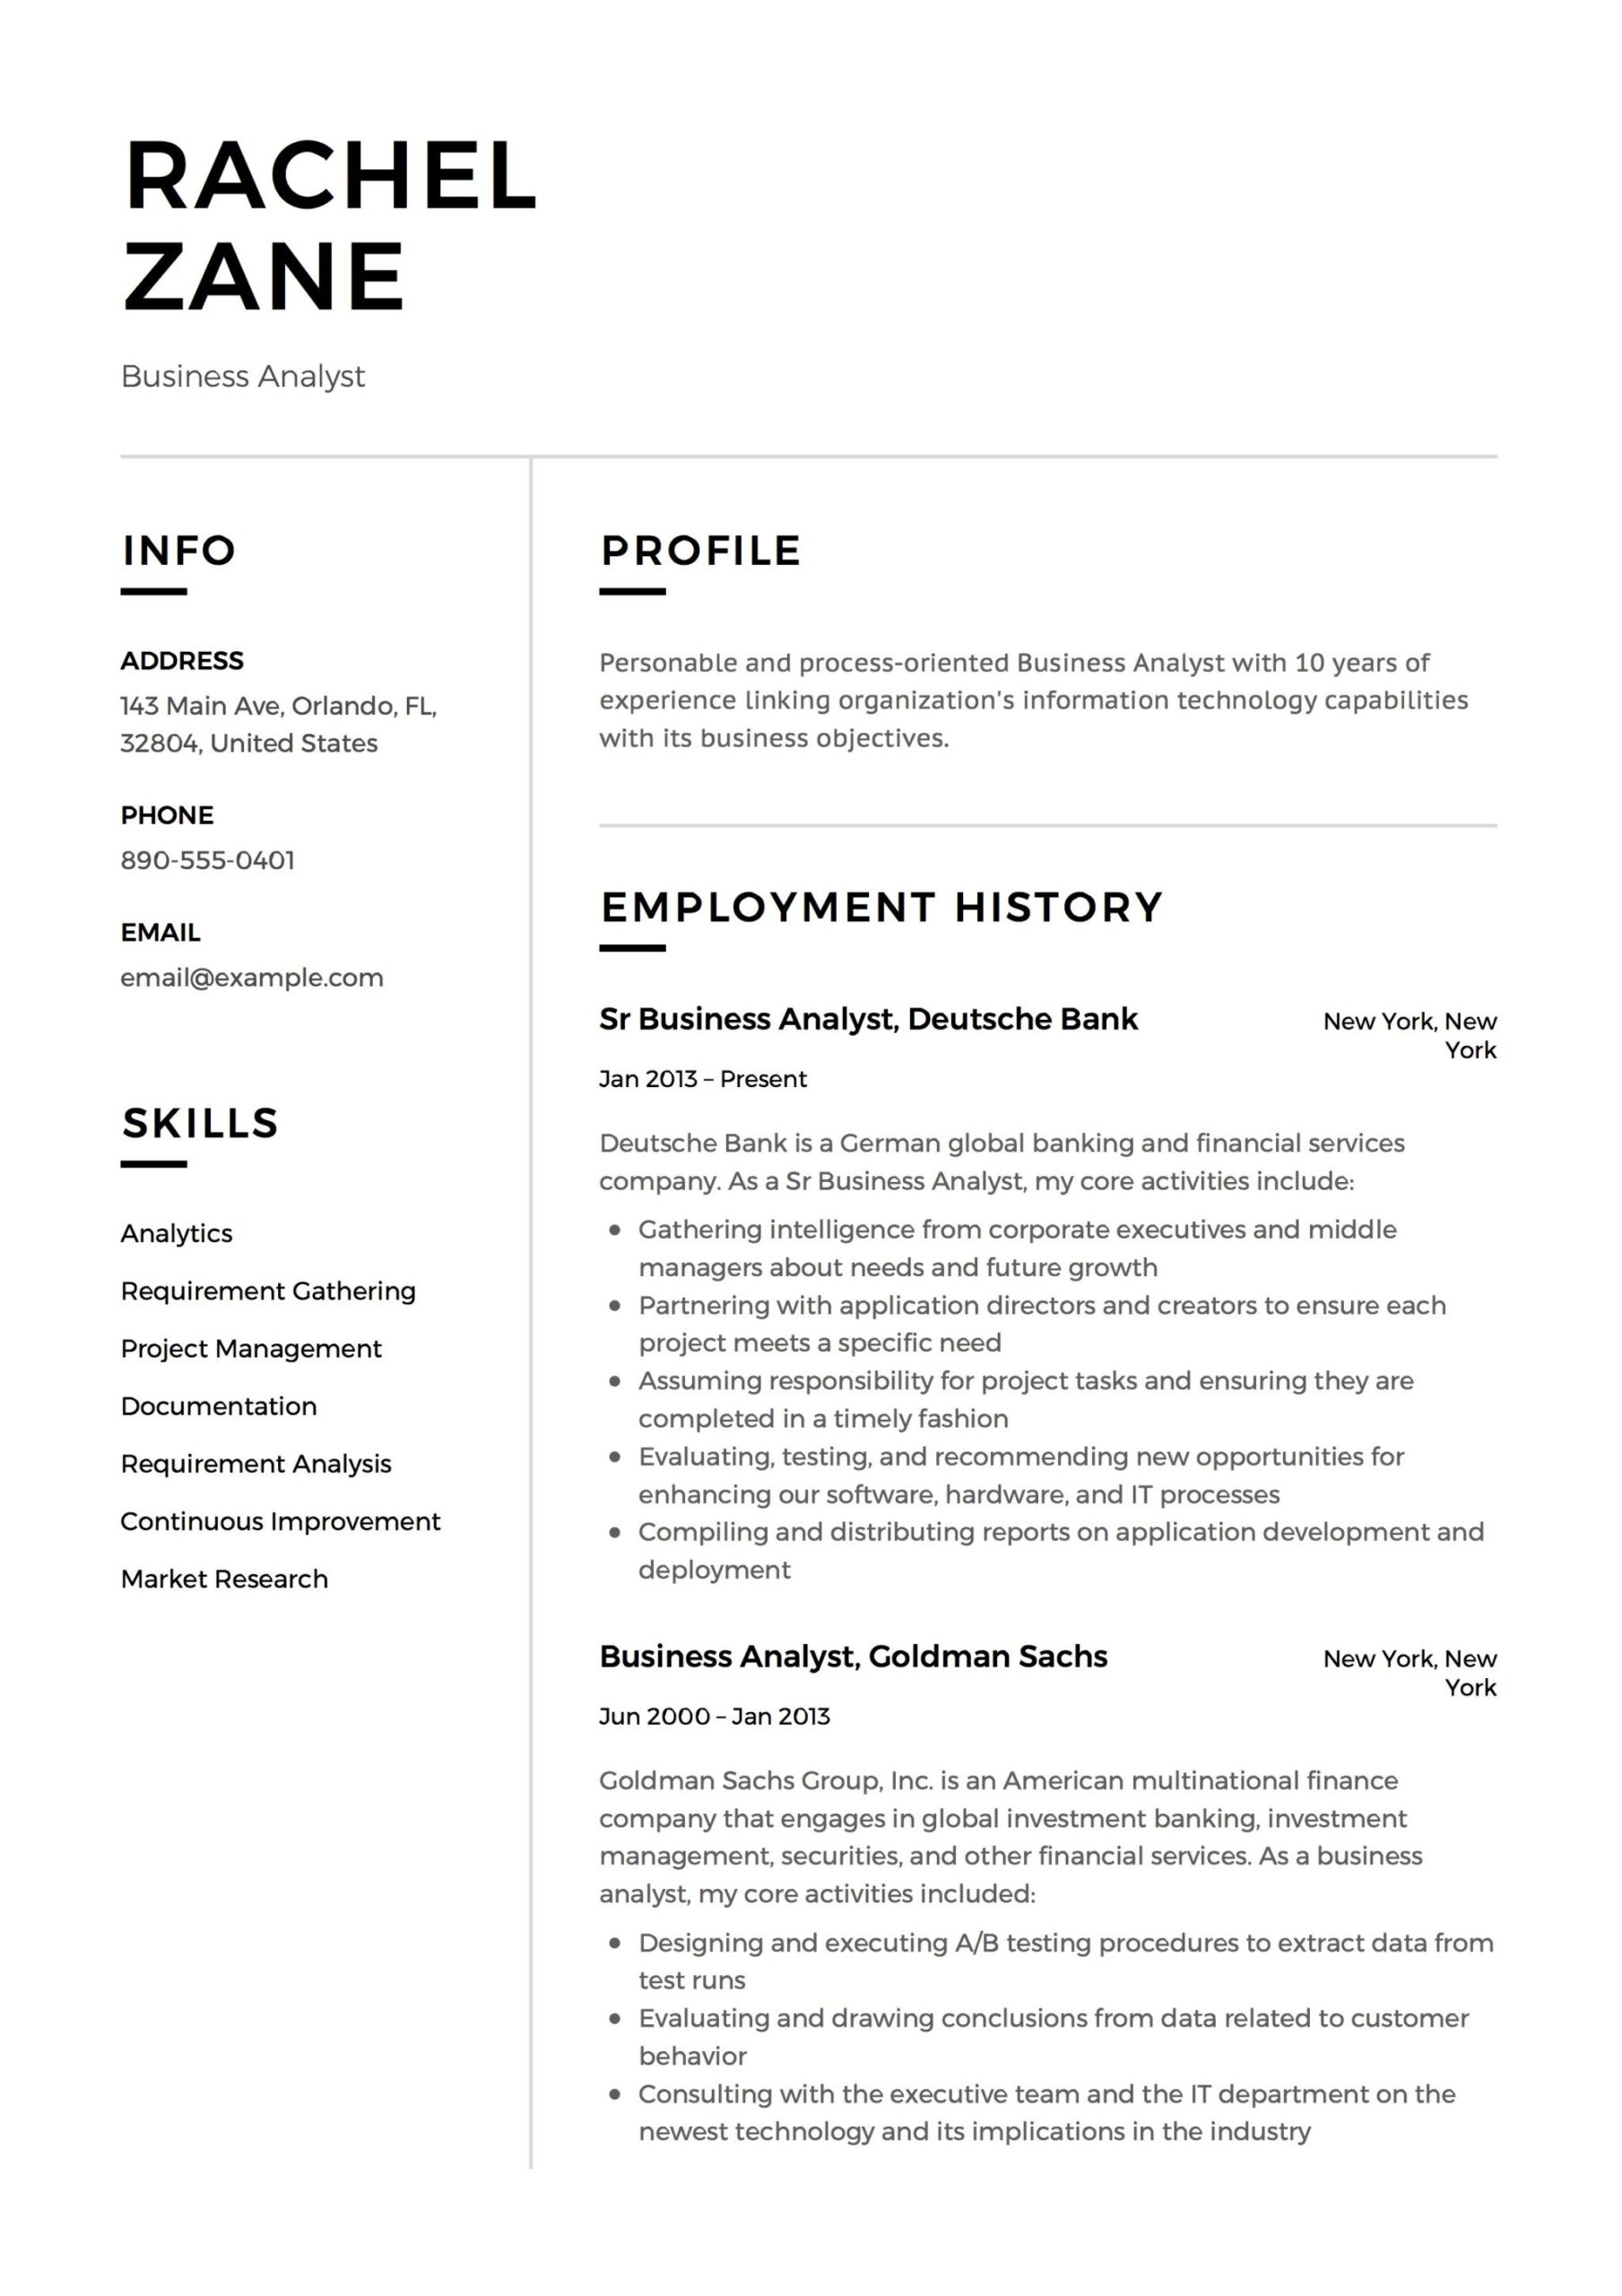 Business Analyst Sample Resume In Hospitality Industry Business Analyst Resume Examples & Writing Guide 2022